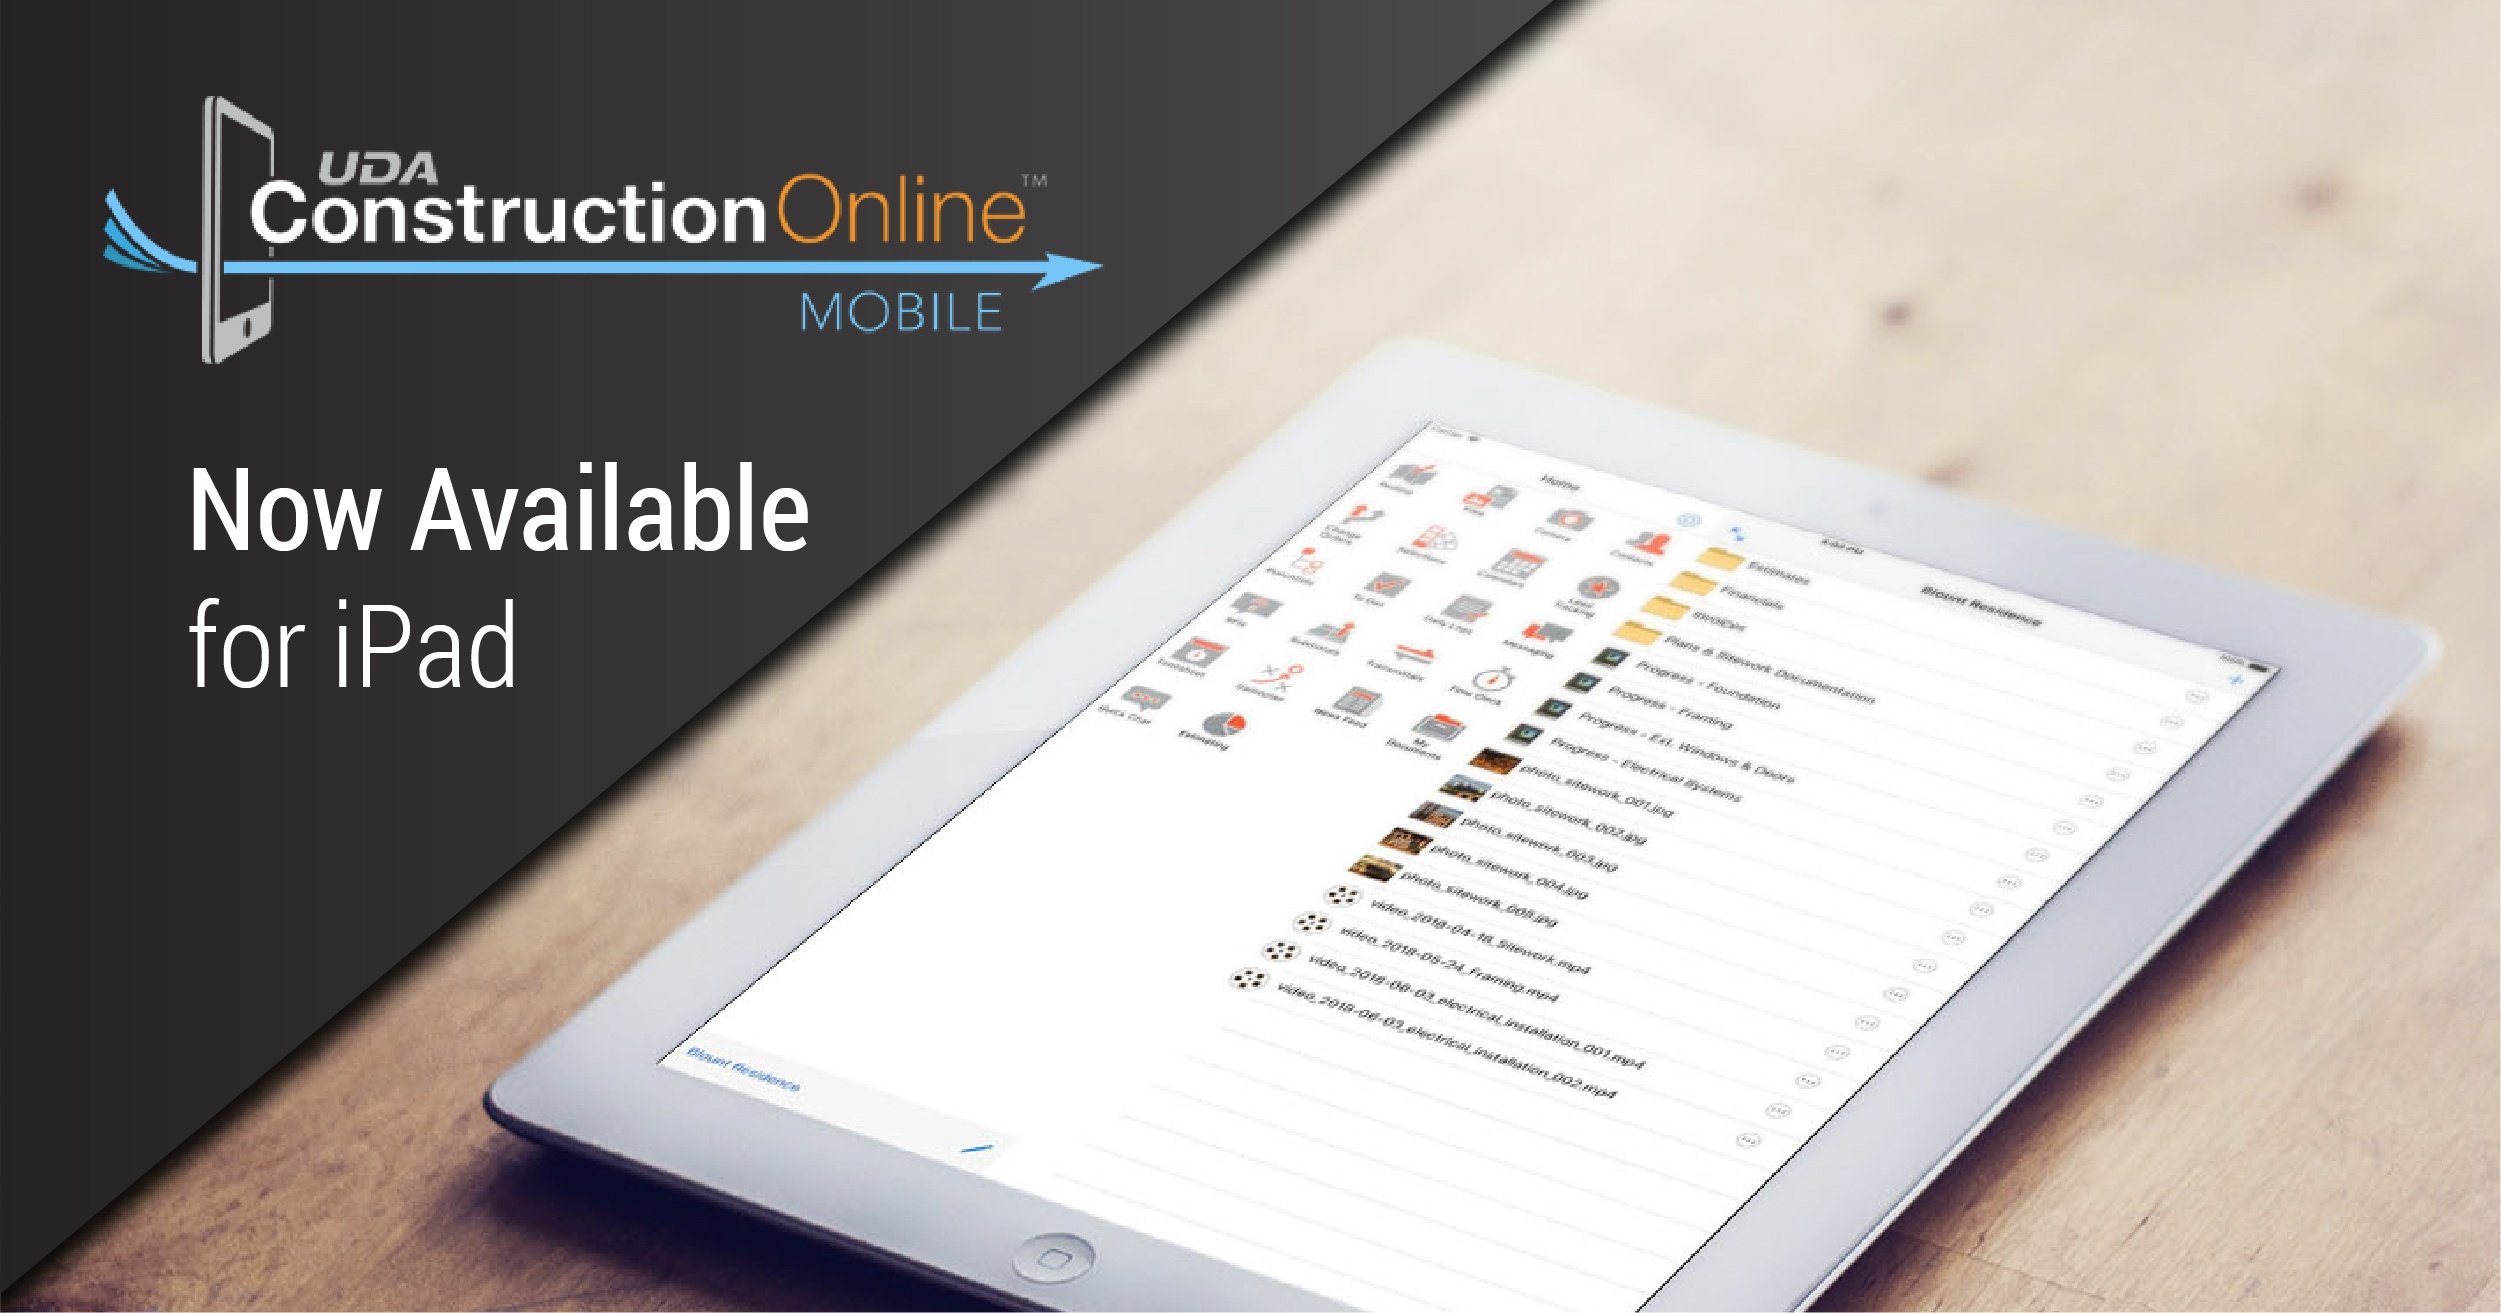 ConstructionOnline Mobile: Now Available for iPad Download